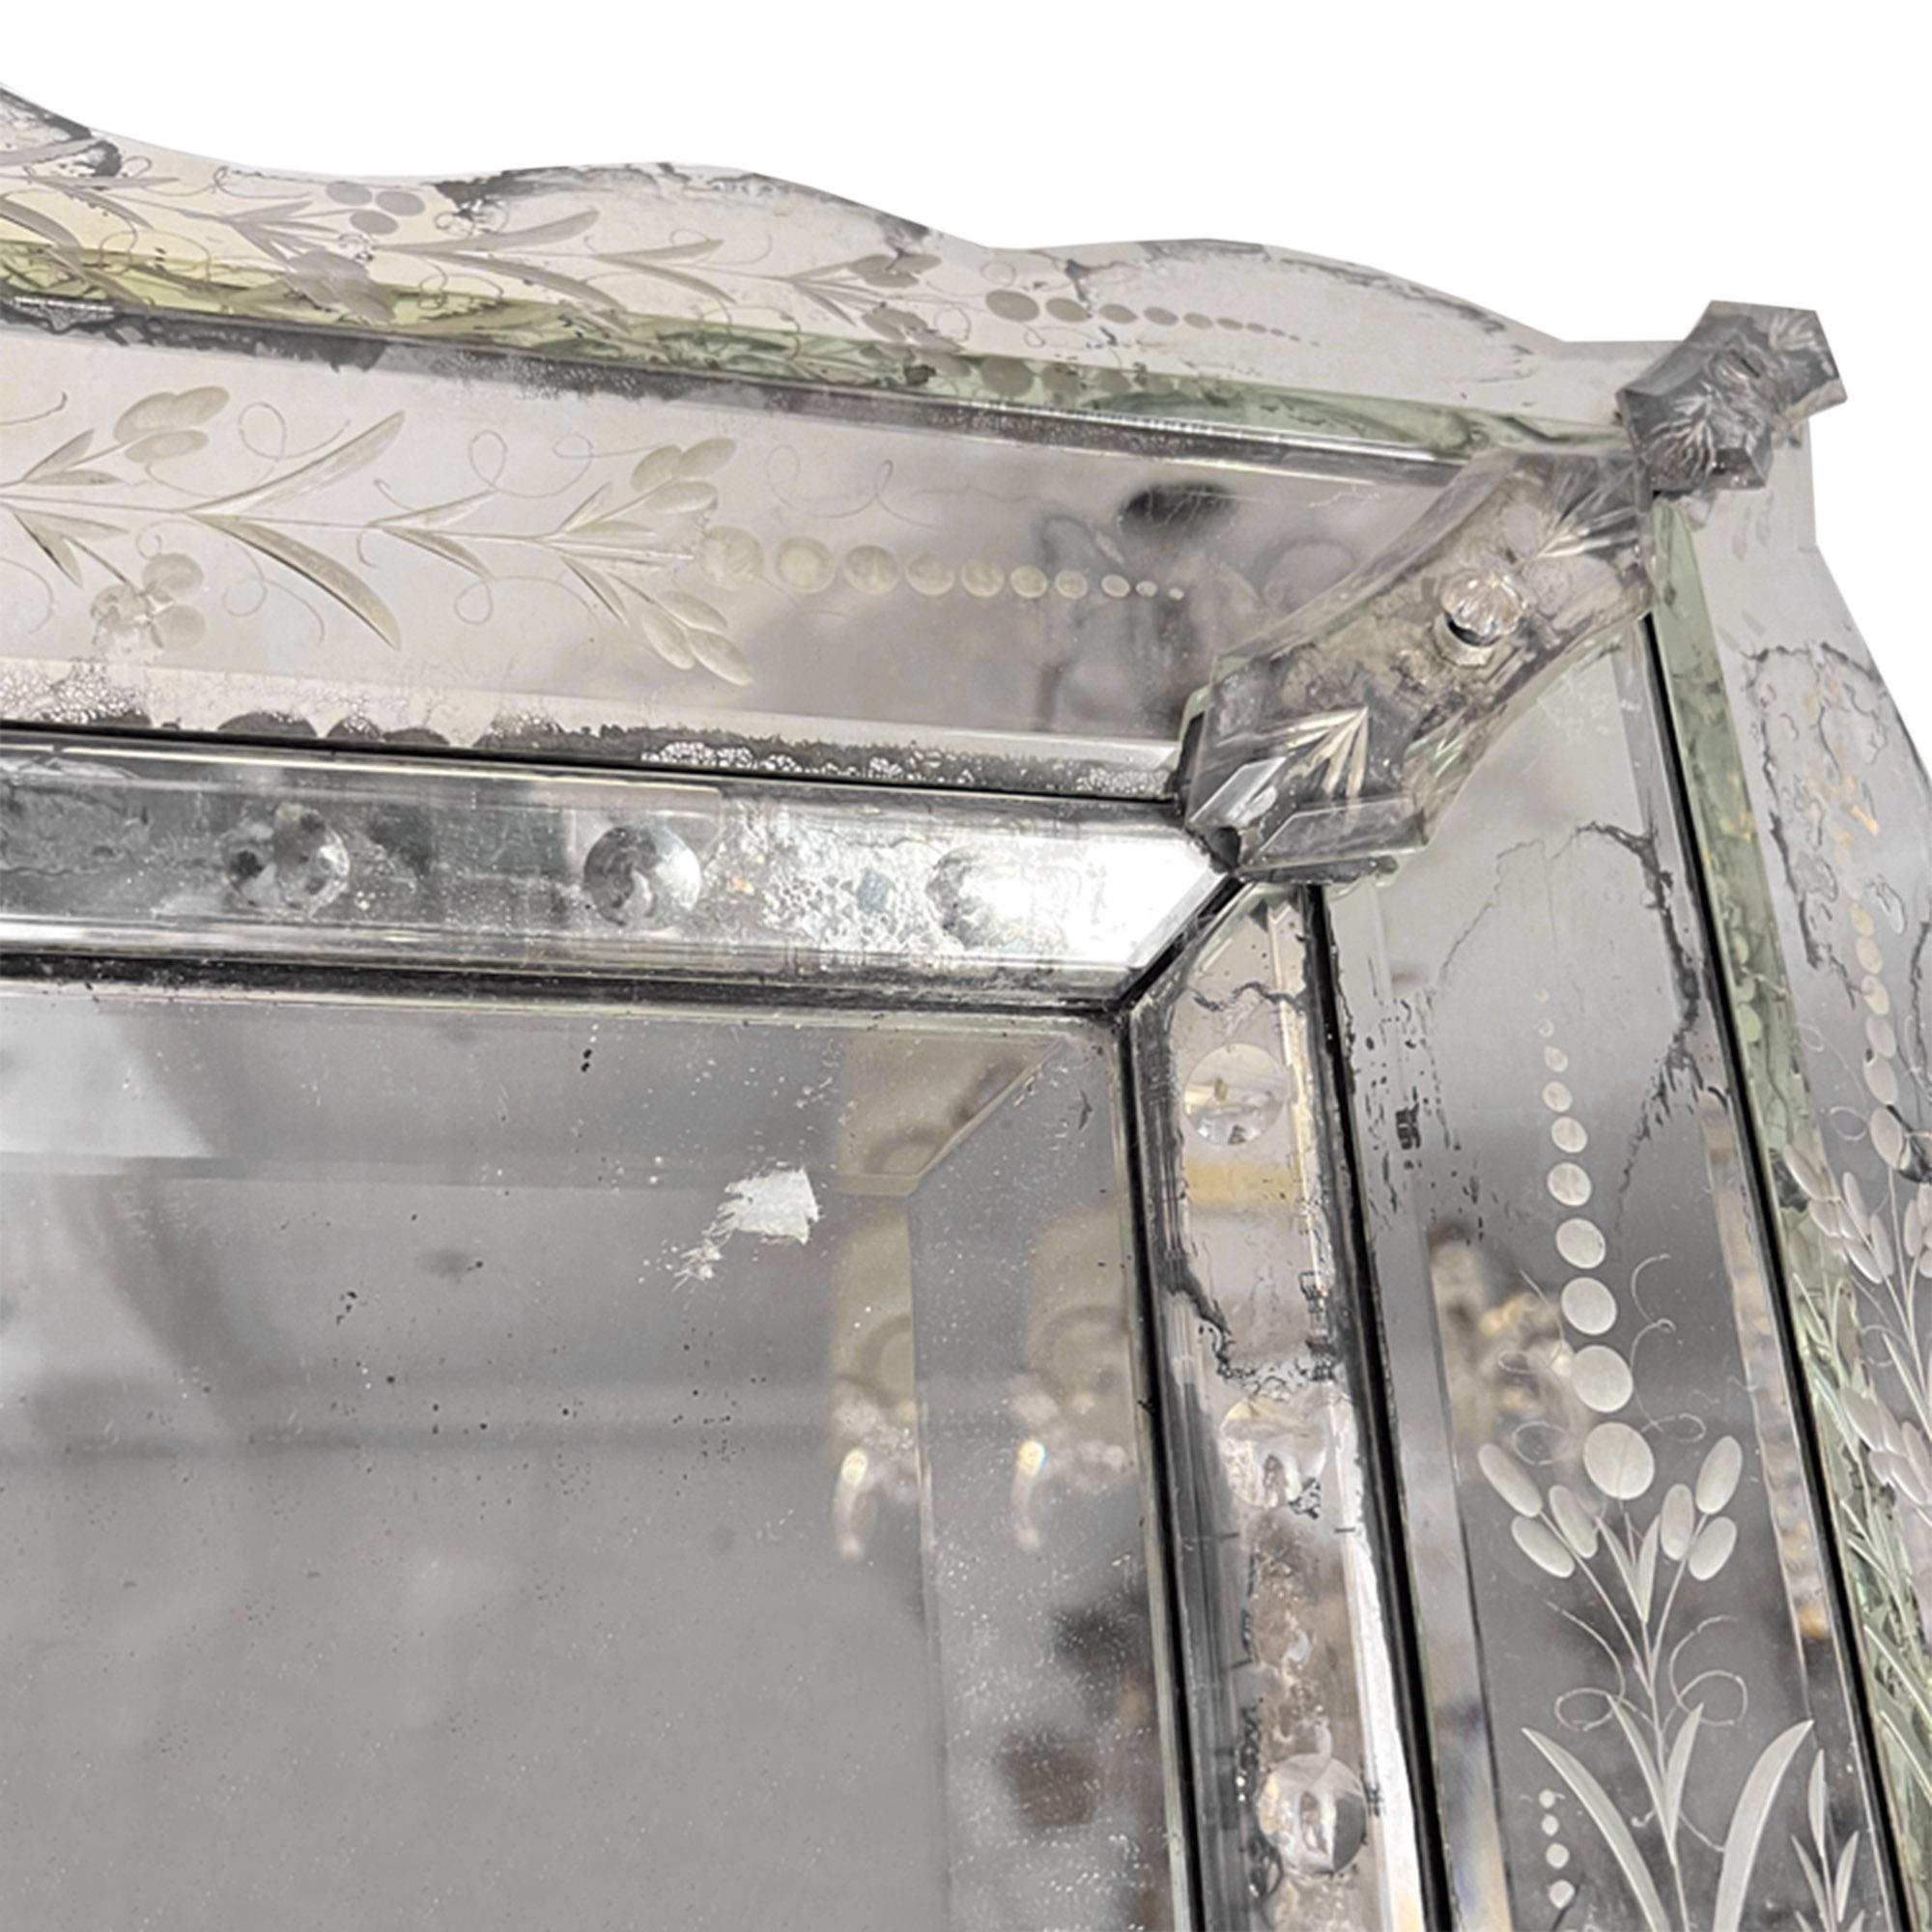 An absolutely stunning mirror made in France in the Venetian style in the 1920s.

Please take a look at all the pictures to see the detail on the frame, the bevelled edge of the main piece of mirror and where the glass is foxed.

This mirror can be